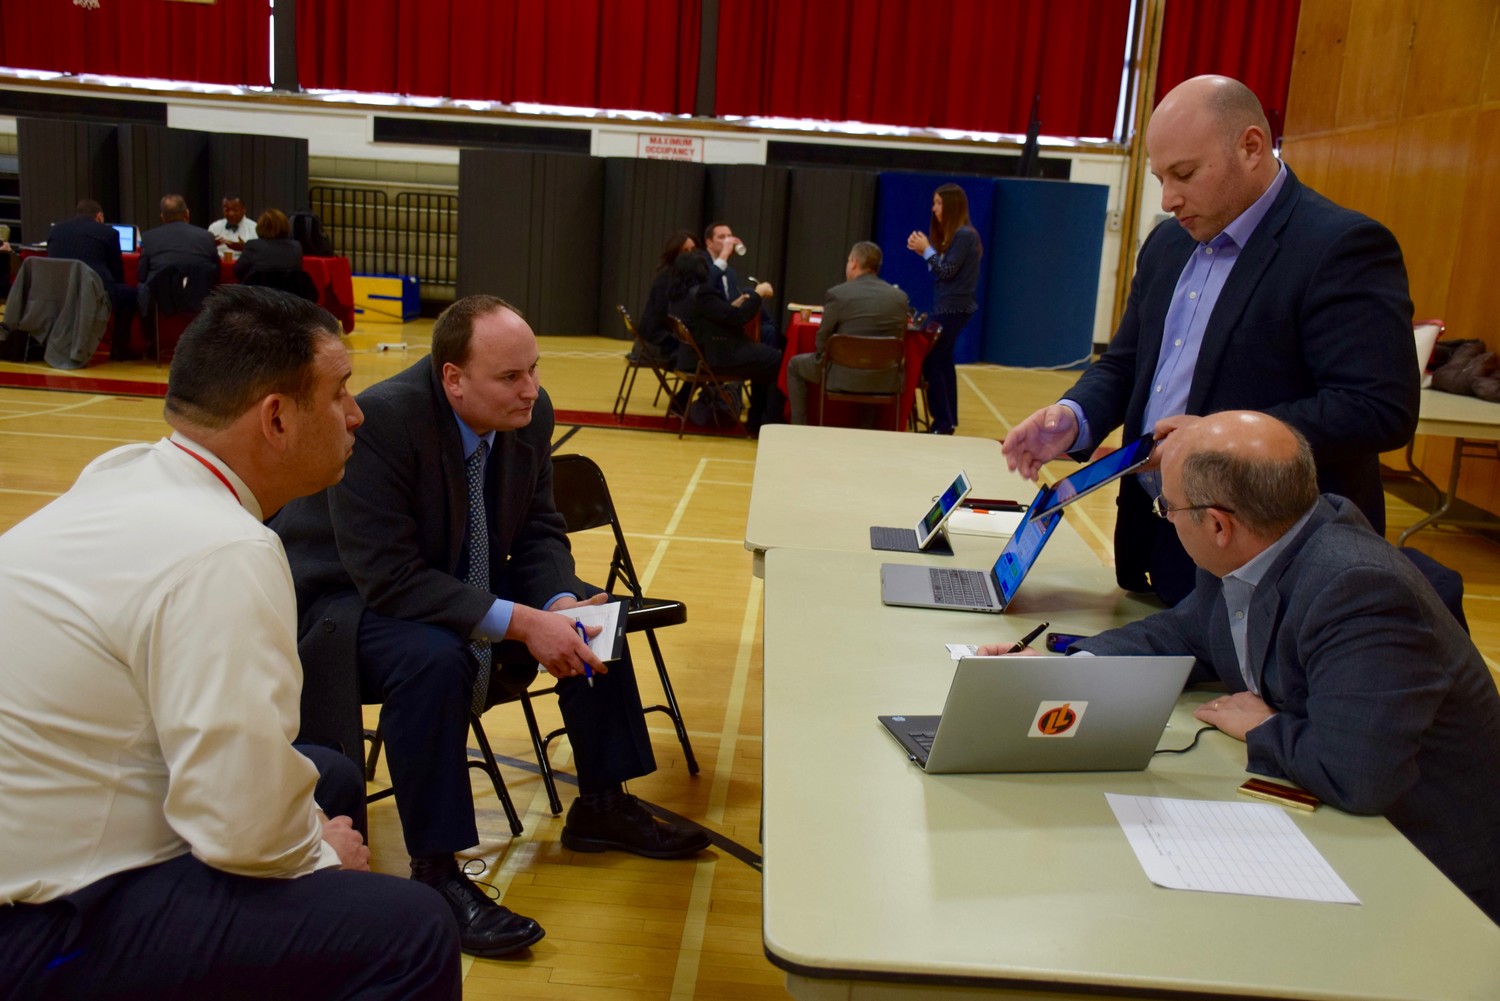 Josh Goldenberg of Legends of Learning, far right, spoke to Gerard Beleckas, Lynbrook’s assistant superintendent for curriculum, instruction and assessment, second from left, and Plainedge Superintendent Dr. Edward Salina at a technology symposium at Levittown Memorial Education Center.